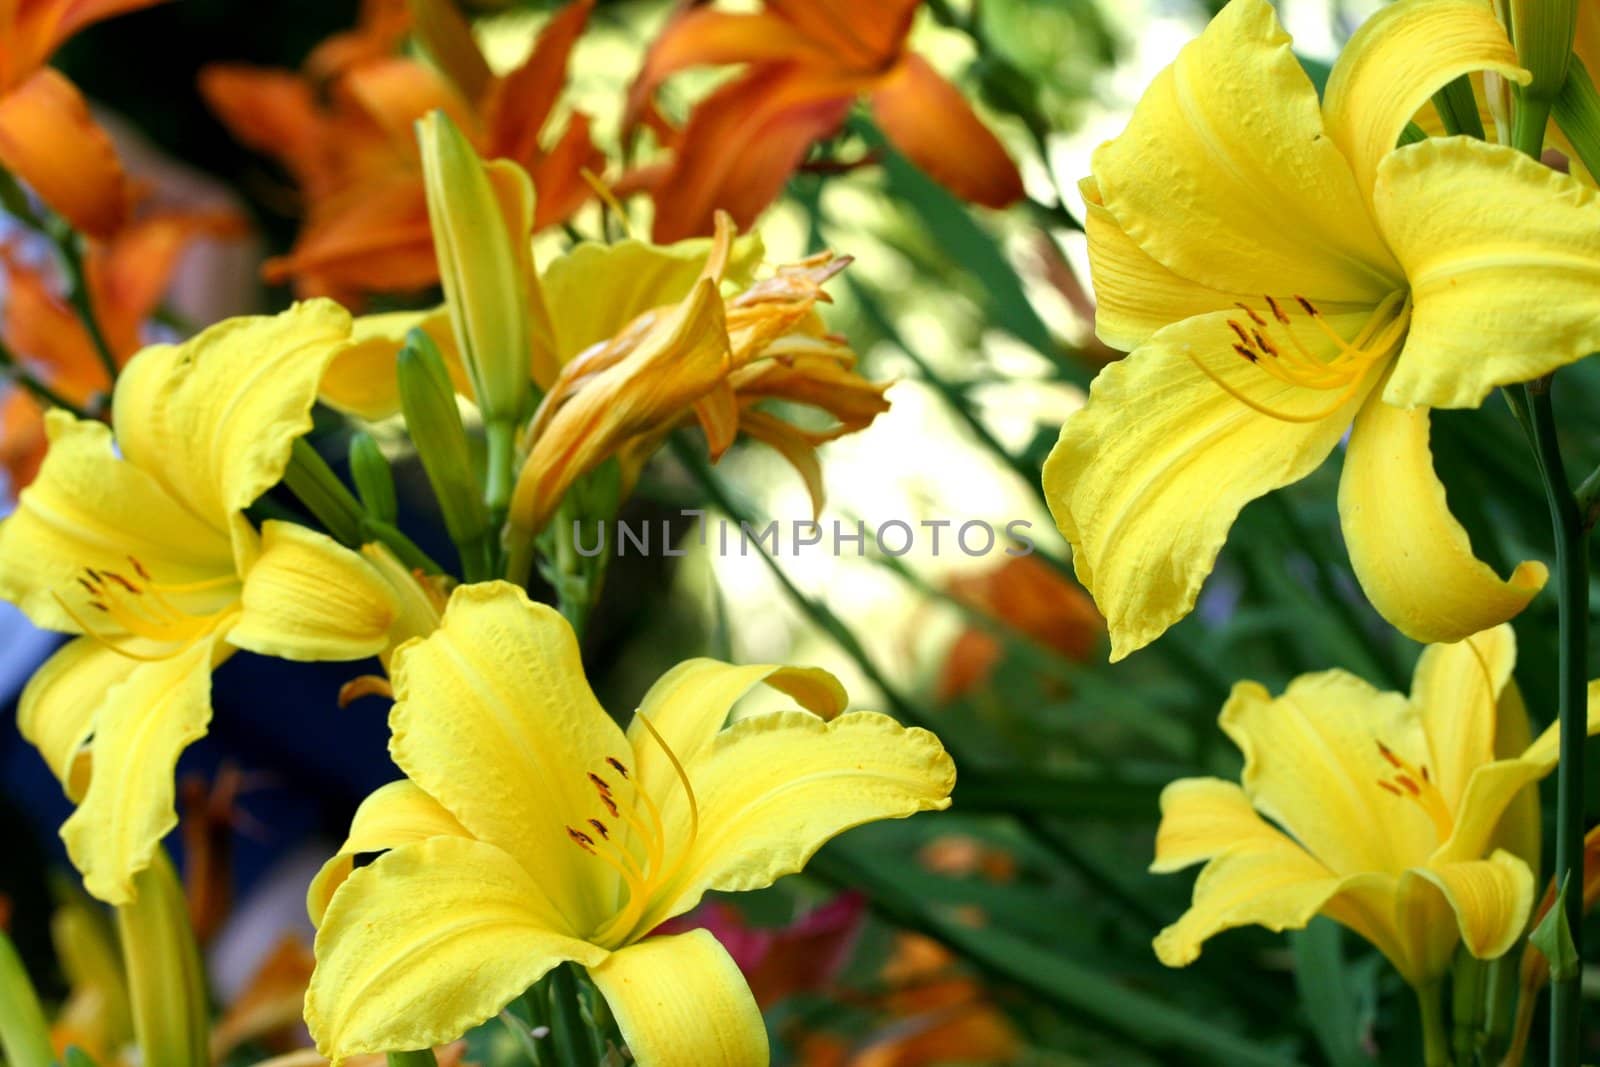 Garden filled with yellow and orange lilies